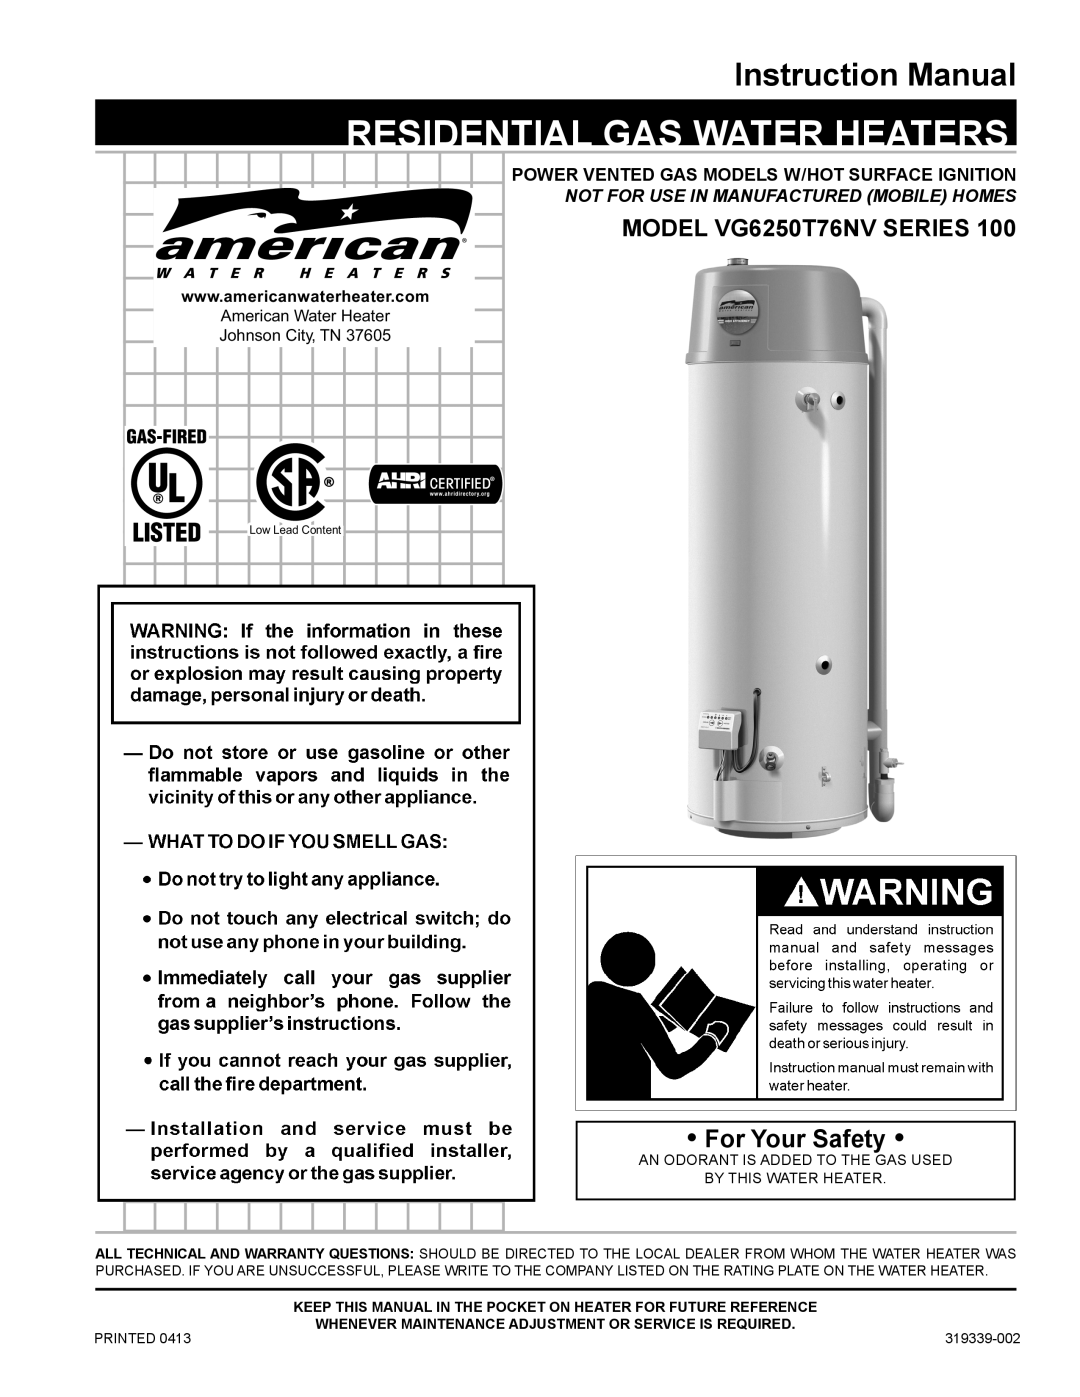 American Water Heater American Water Heaters Residential Gas Water Heater instruction manual Residential Gas Water Heaters 